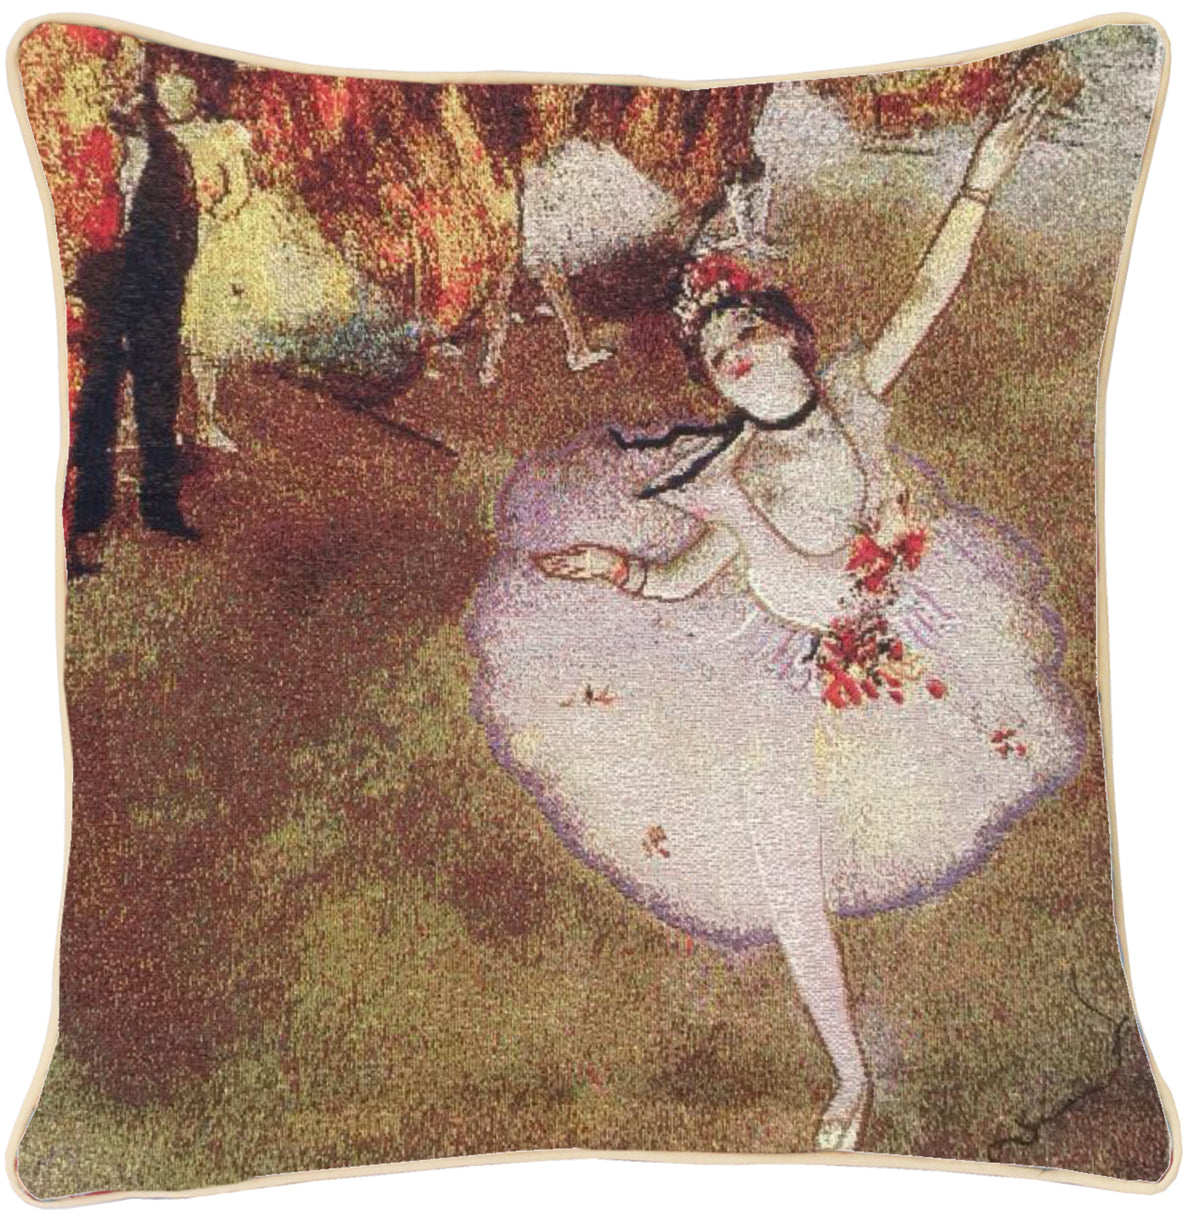 Degas: The Star Tapestry Cushion Cover